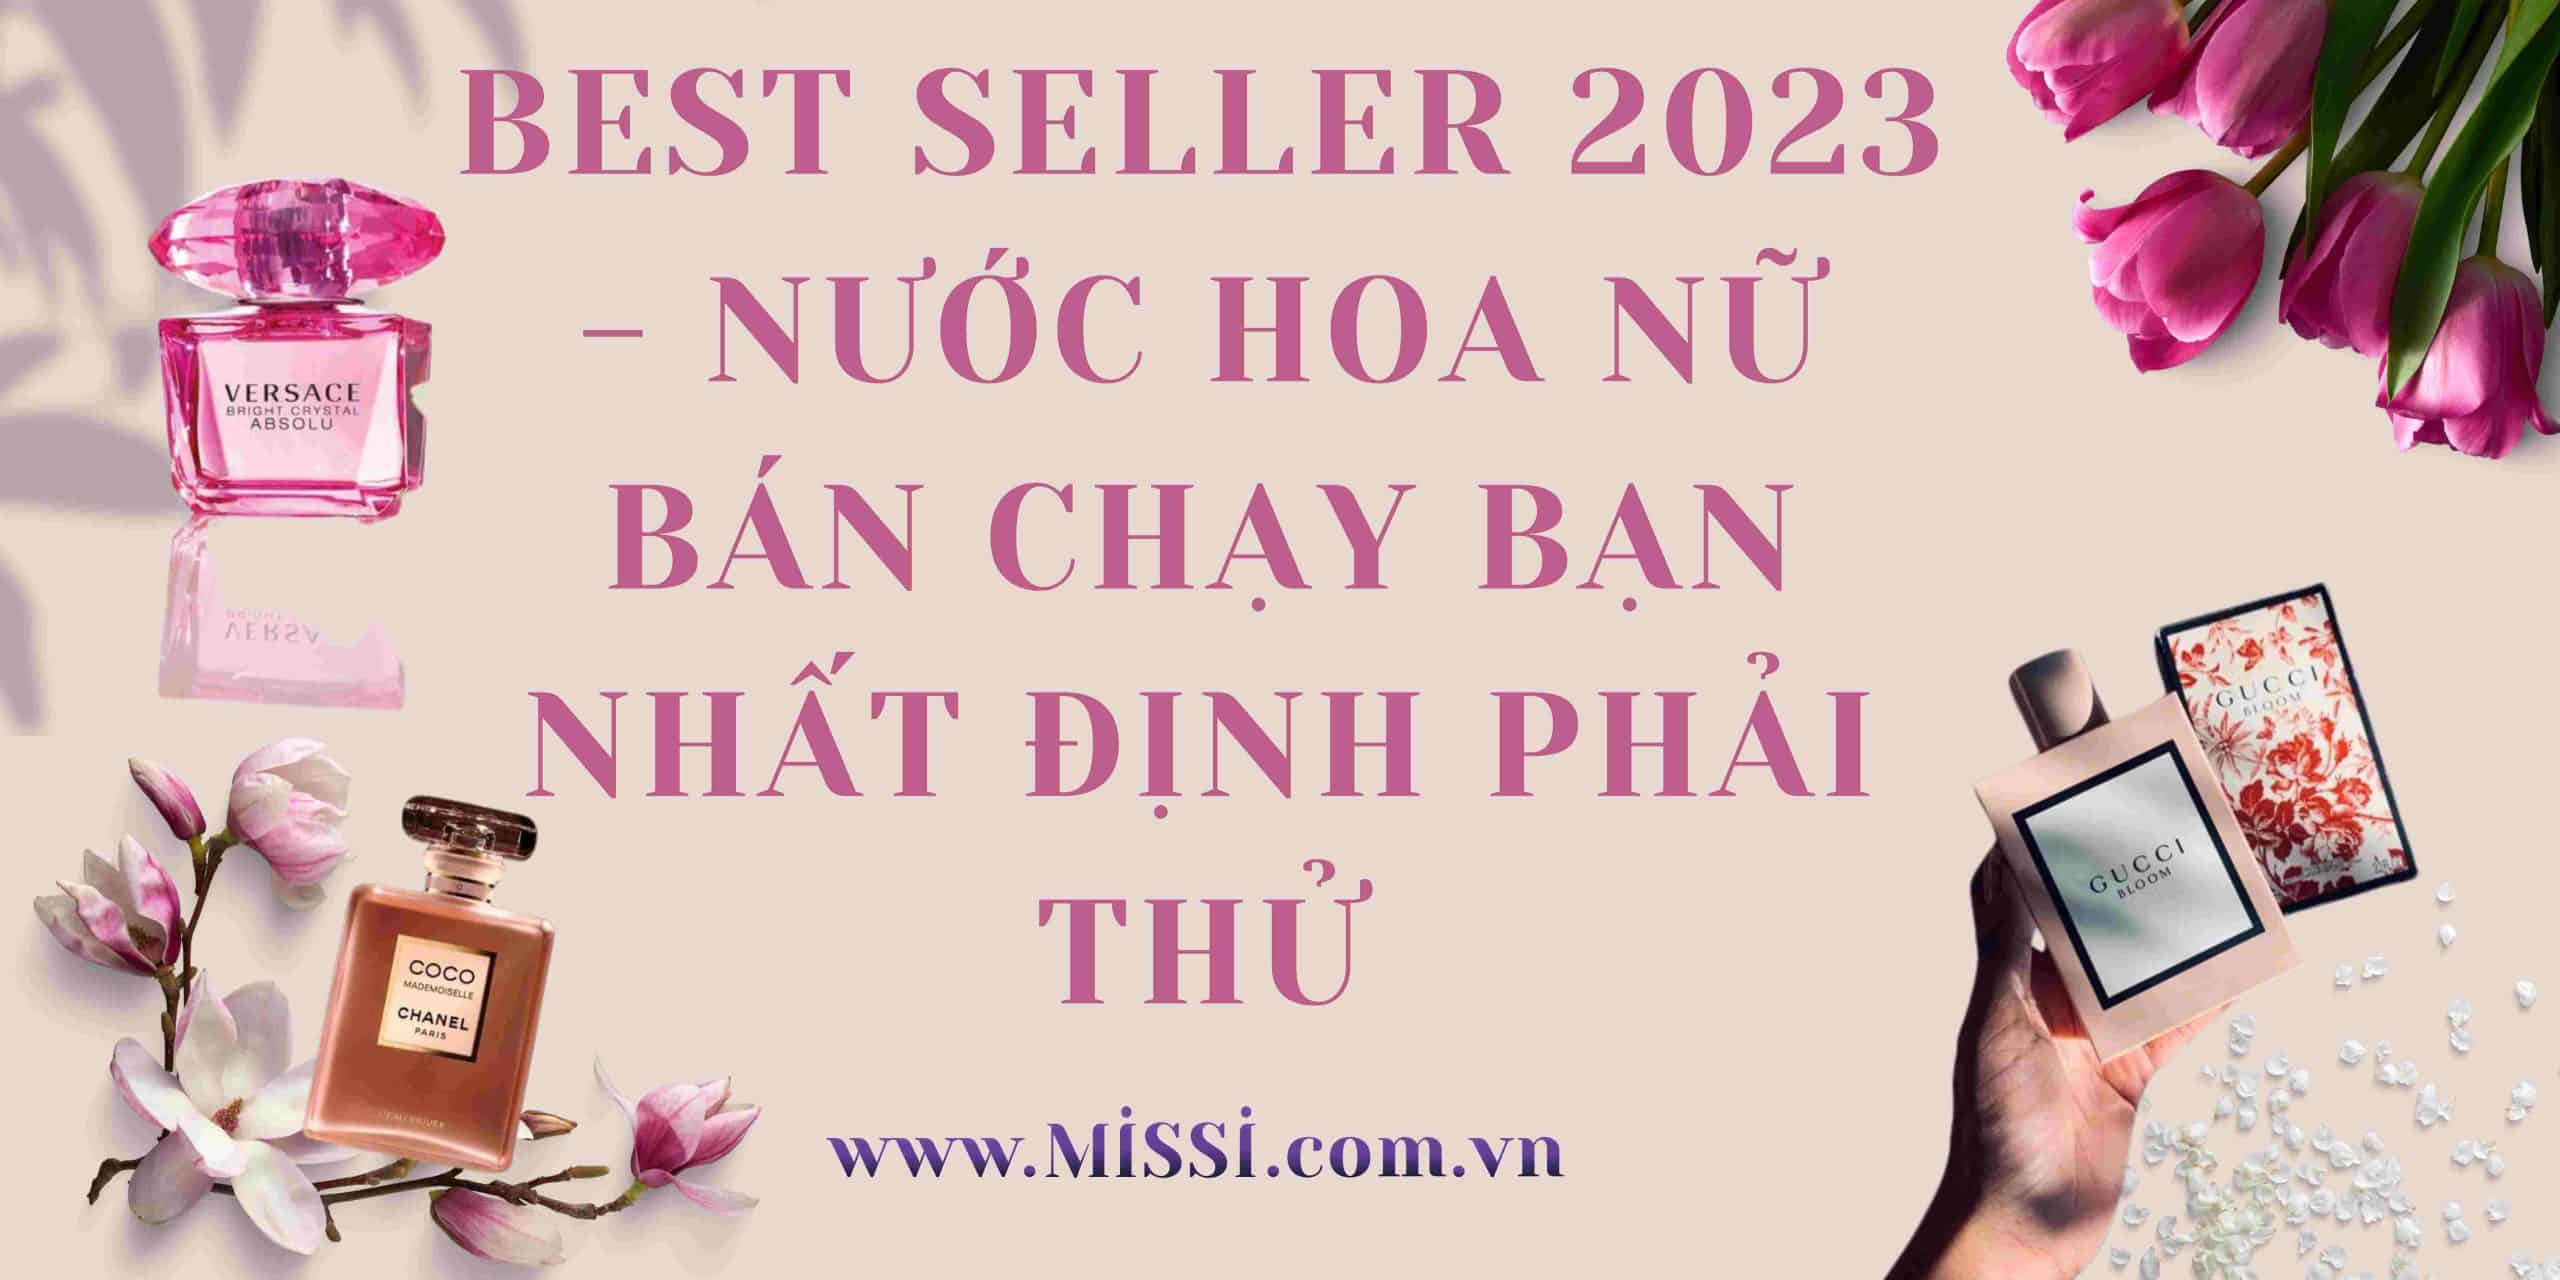 Best Seller 2023 Nuoc hoa nu ban chay ban nhat dinh phai thu scaled